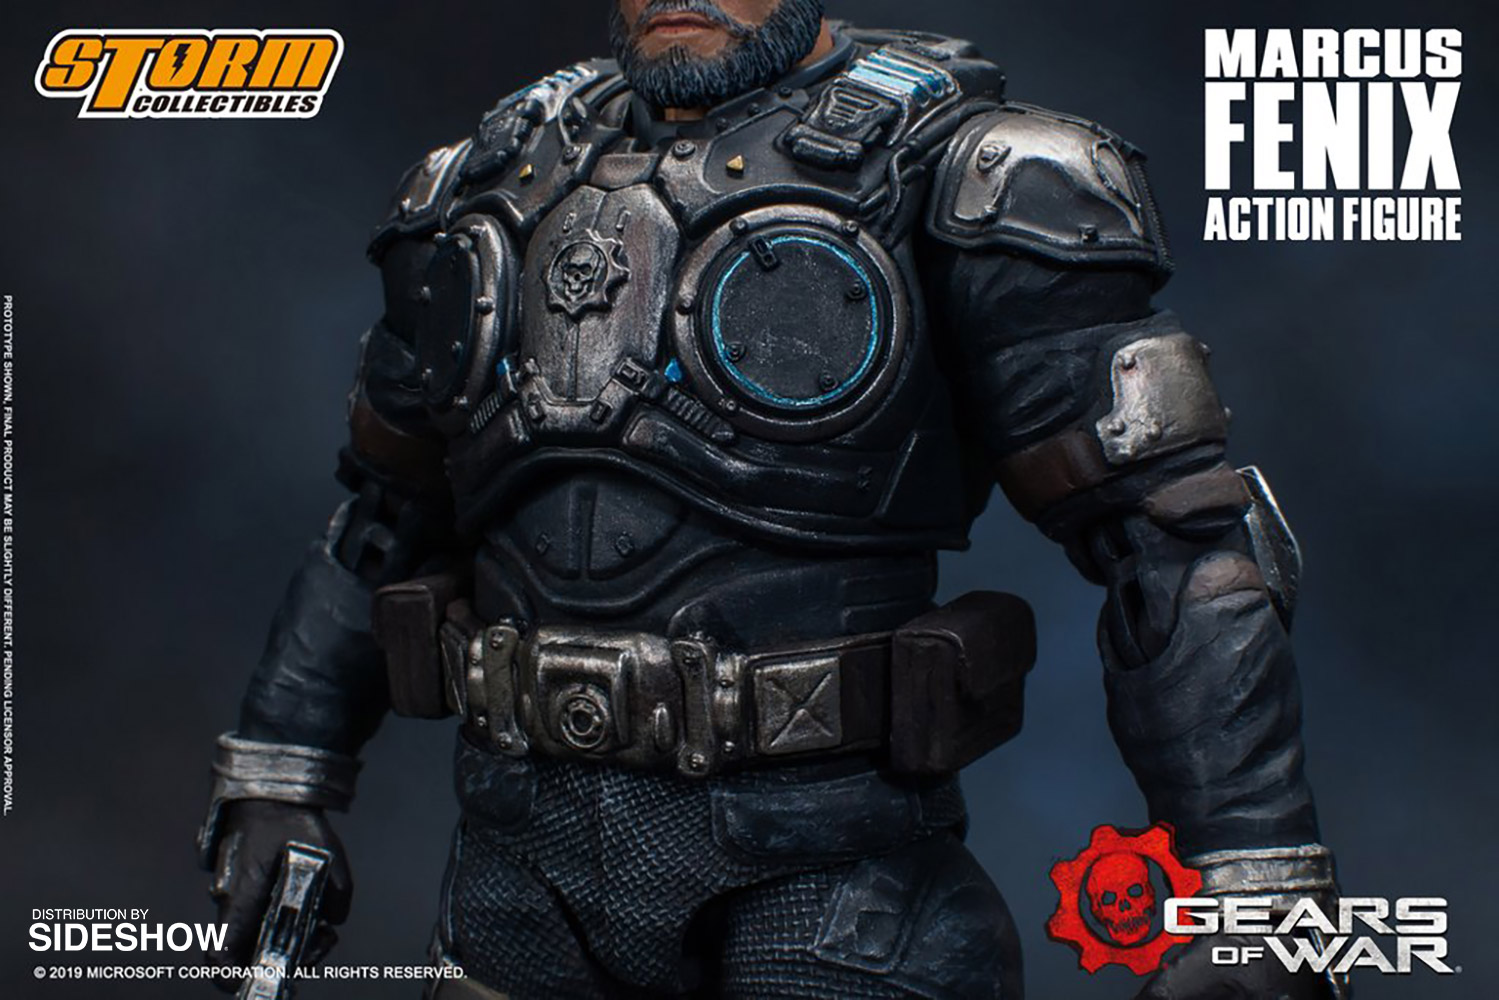 The Marcus Fenix 1 12 Action Figure Sideshow Collectibles